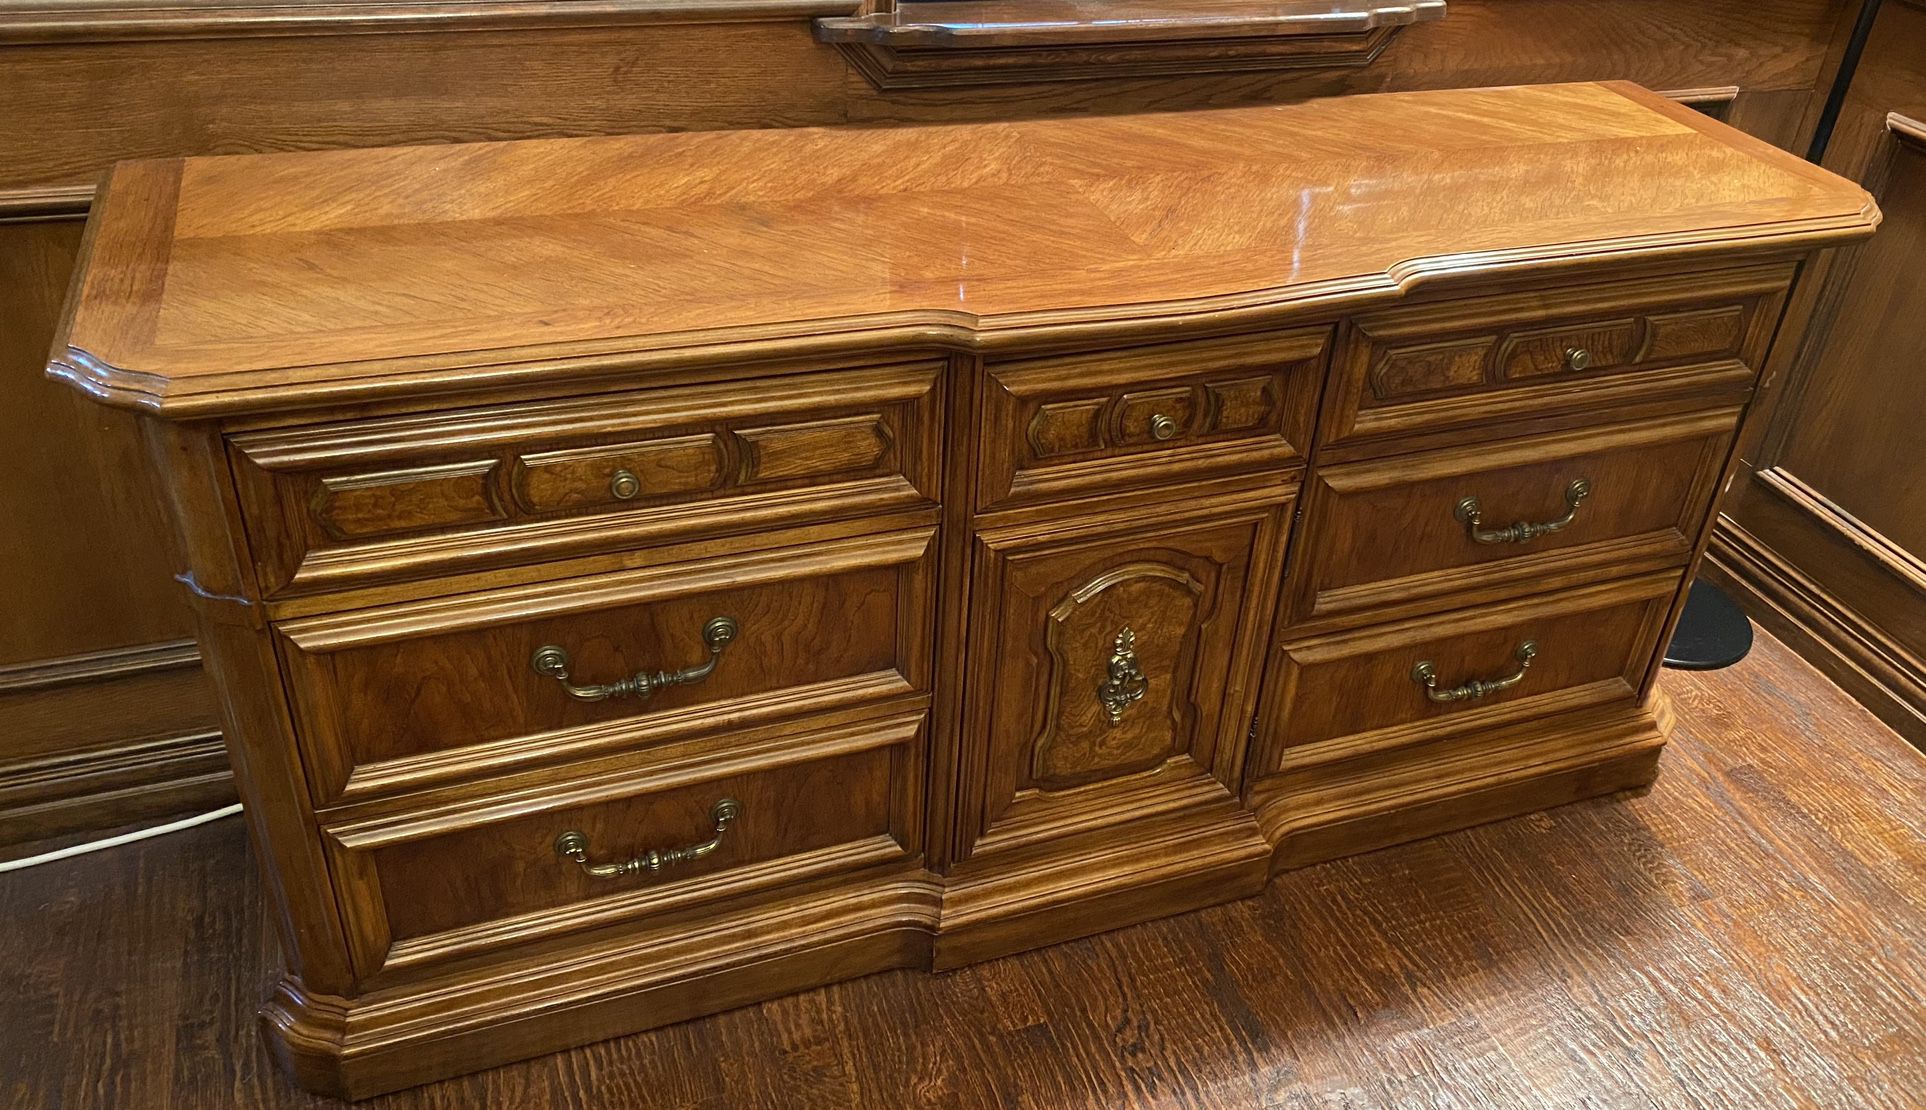 Stanley Solid Wood Dresser Dove Tail Drawers - Super Nice Quality!